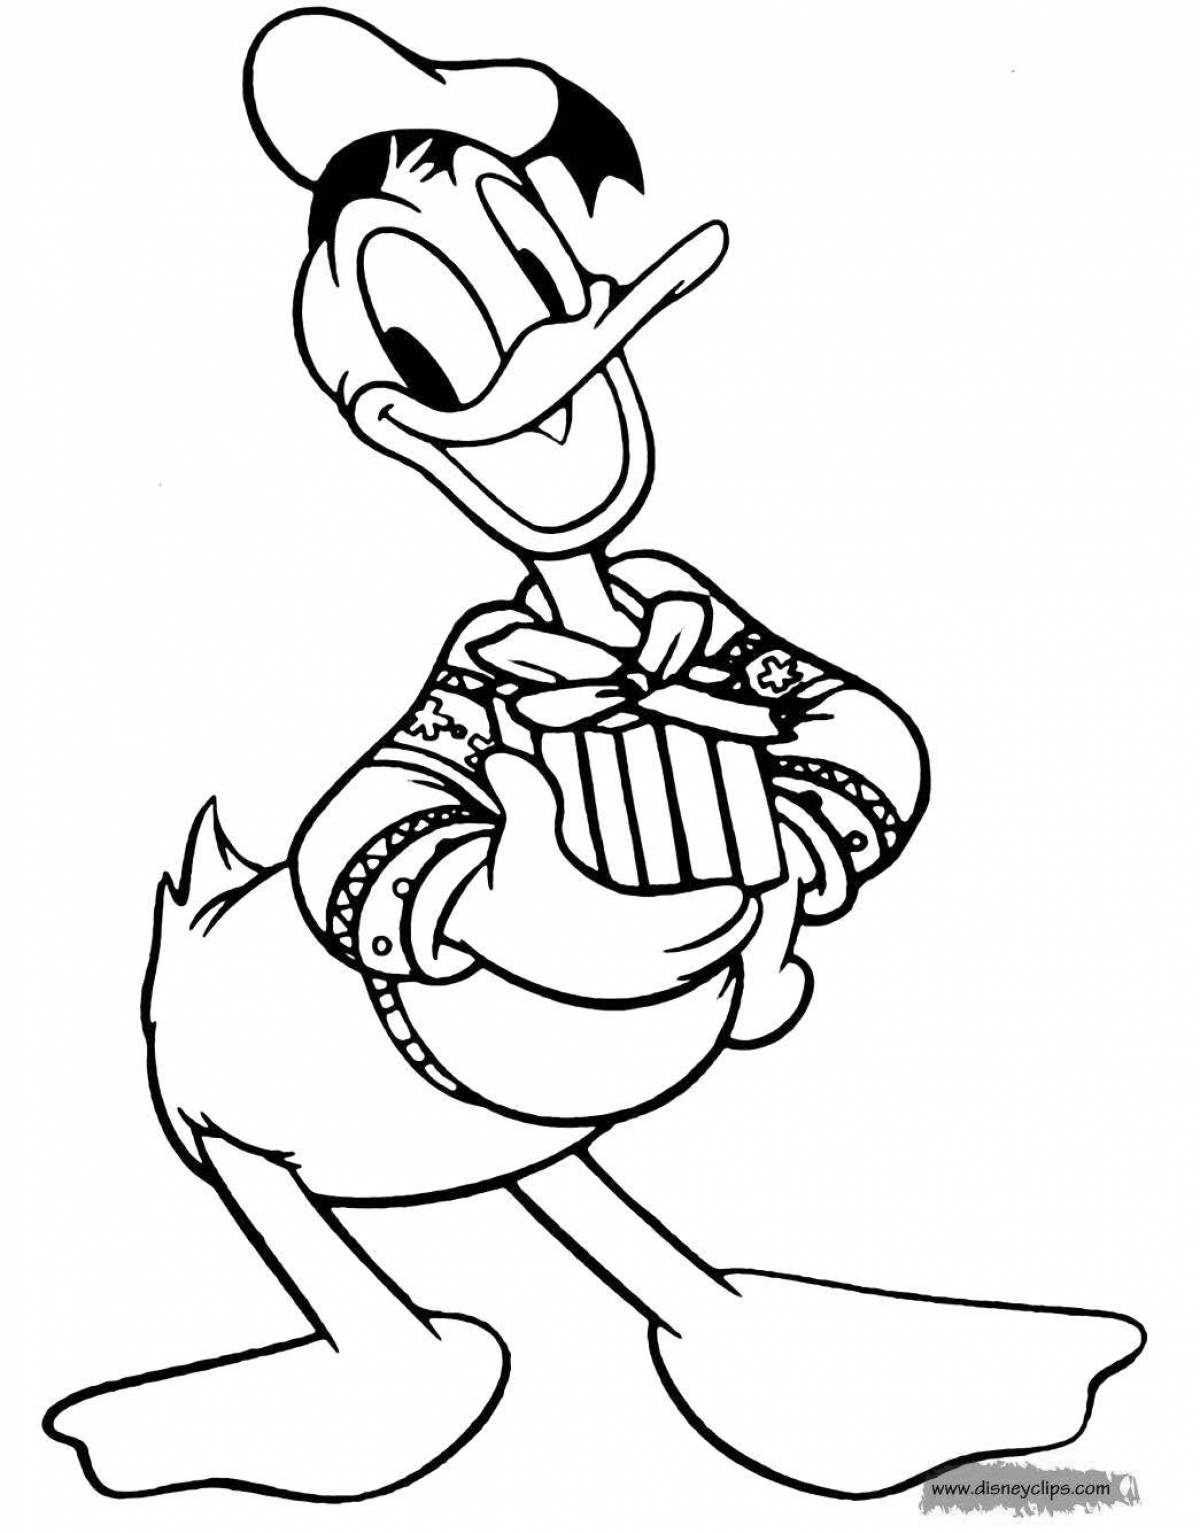 Donald duck with money #4